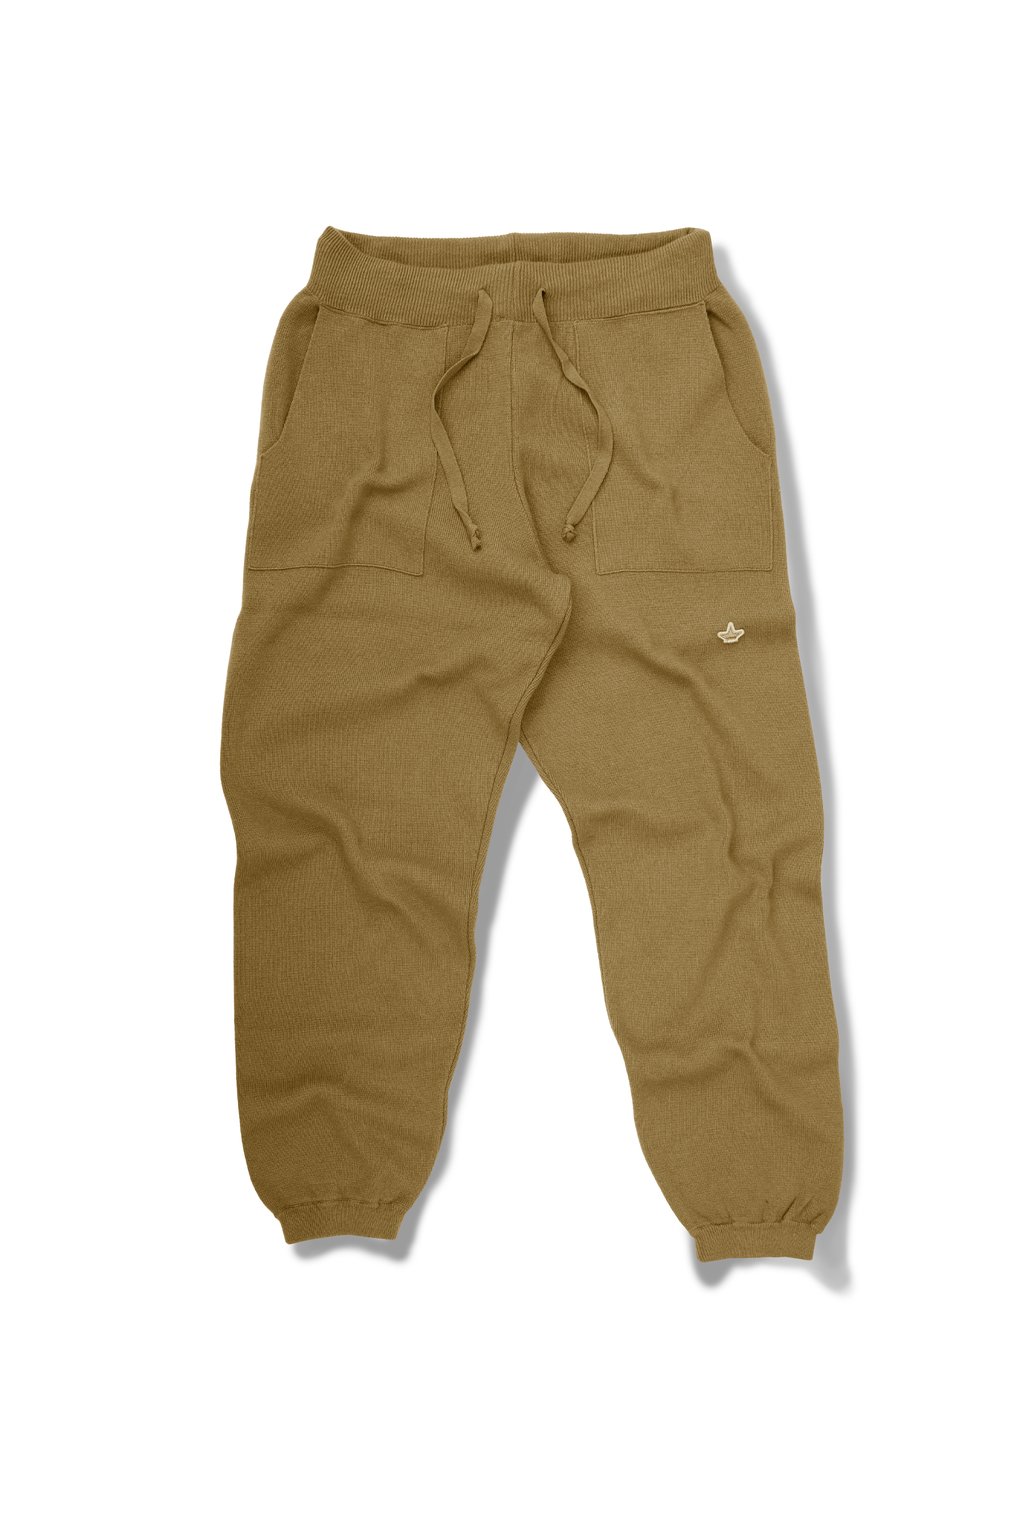 Men's trousers - PM2050TCALN - Biscuit